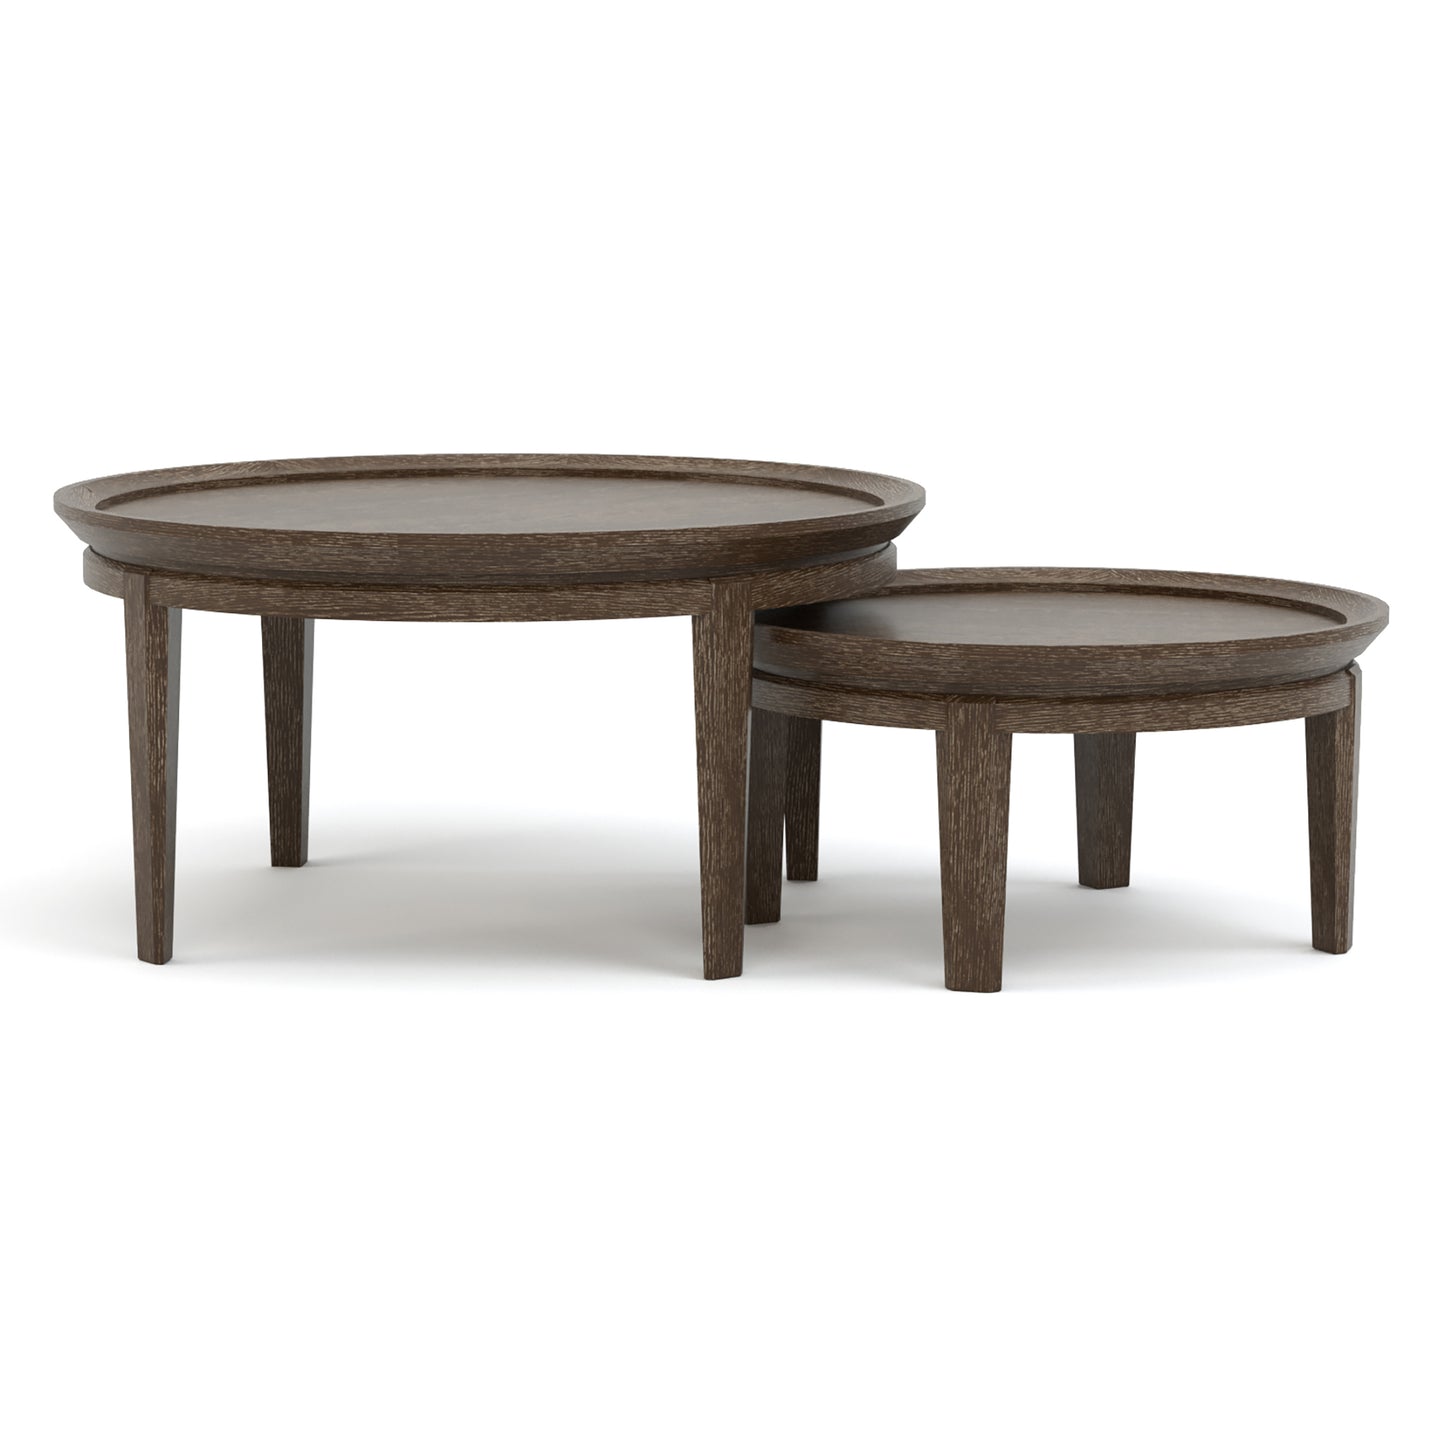 Maidstone 36-inch Round Cocktail Table